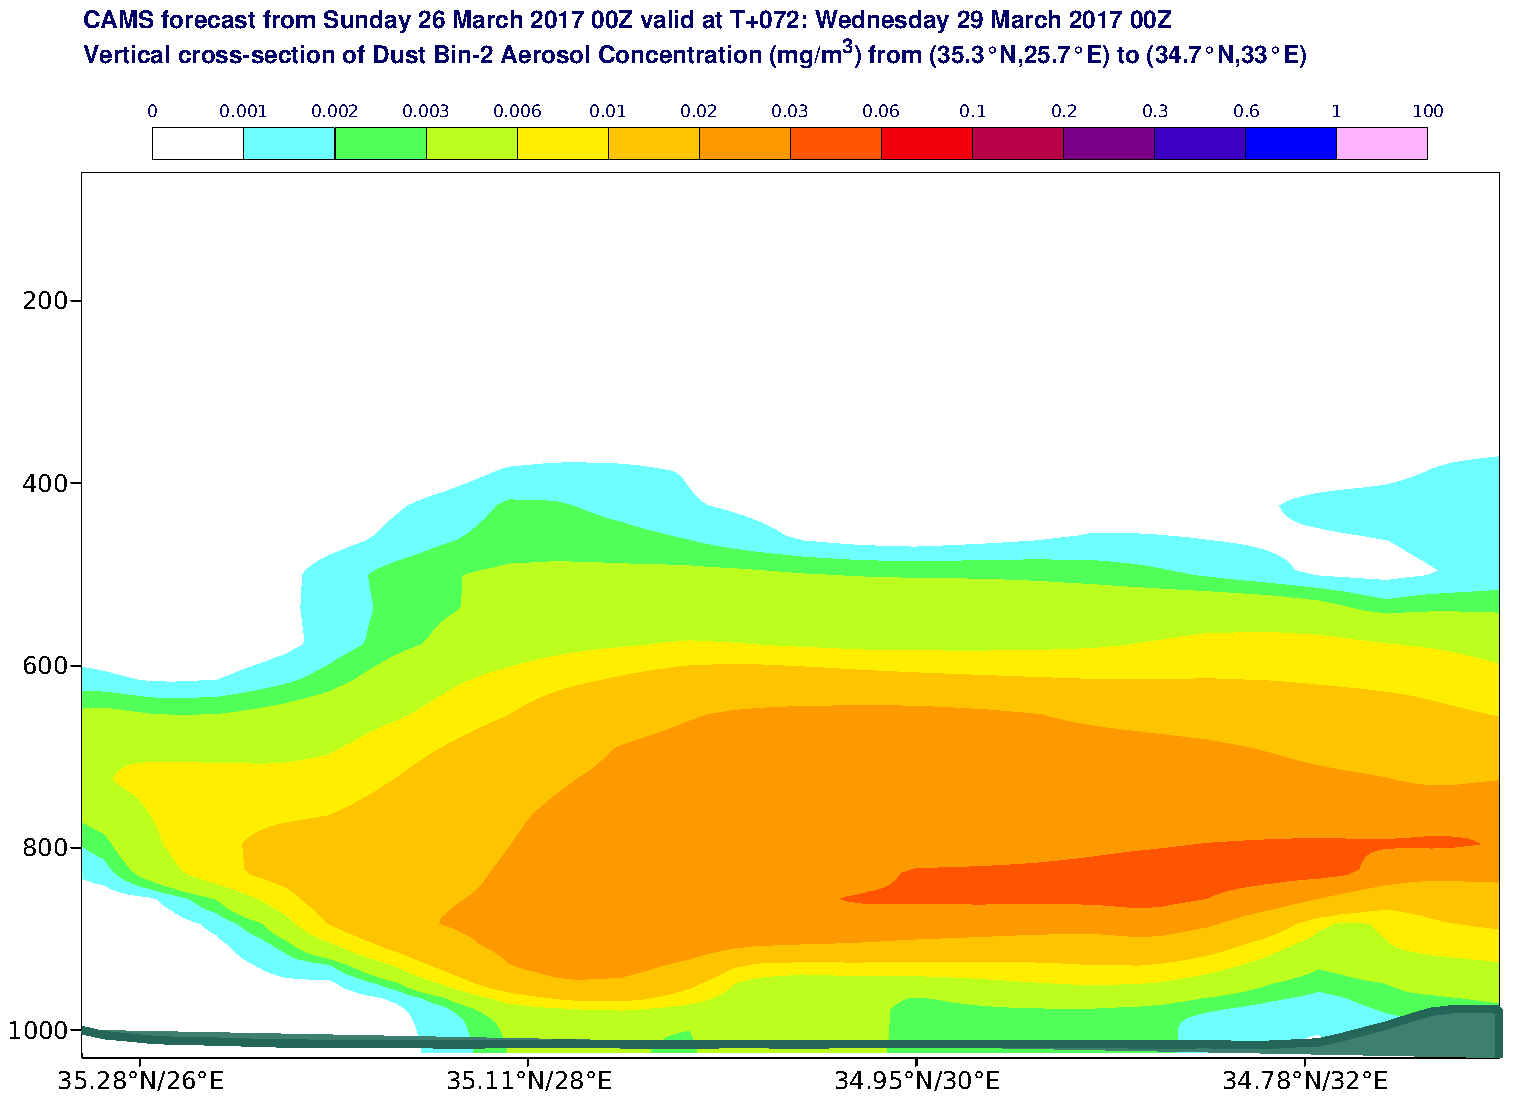 Vertical cross-section of Dust Bin-2 Aerosol Concentration (mg/m3) valid at T72 - 2017-03-29 00:00